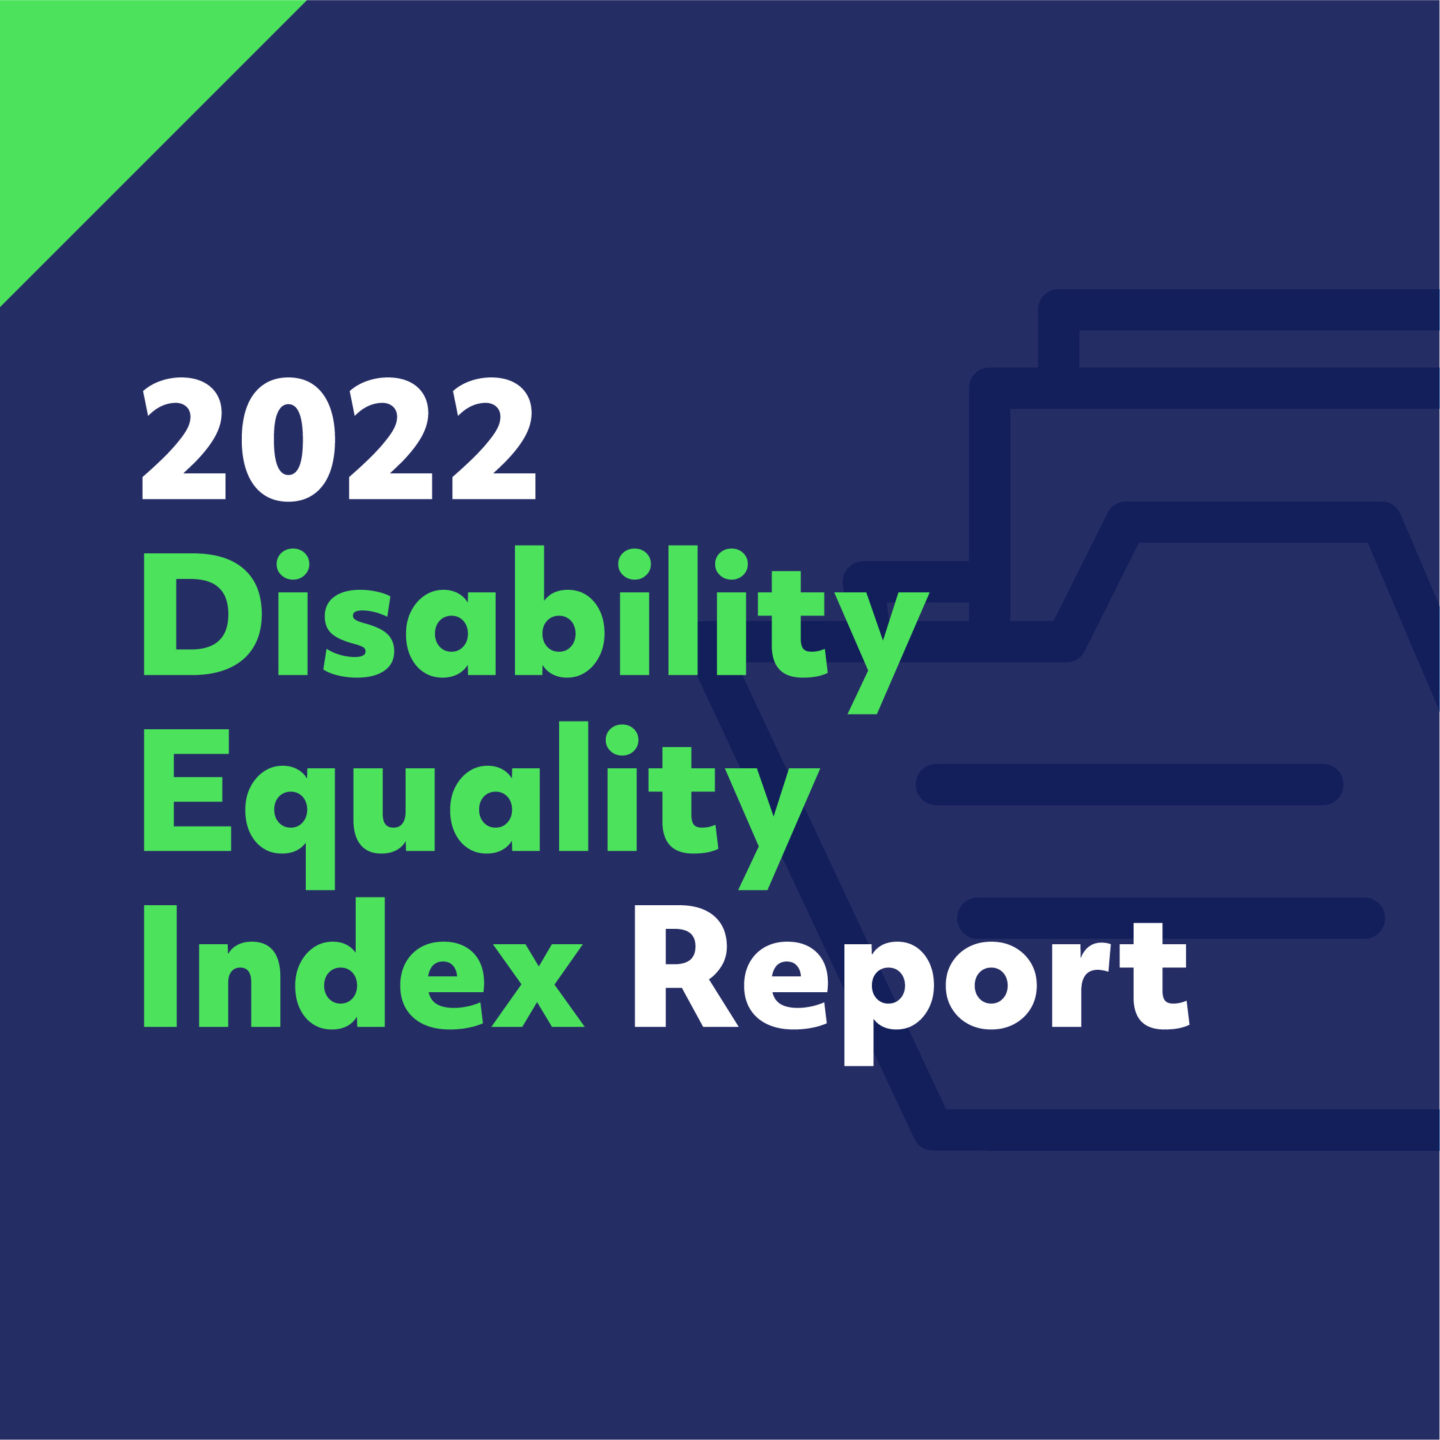 2022 Disability Equality Index Report